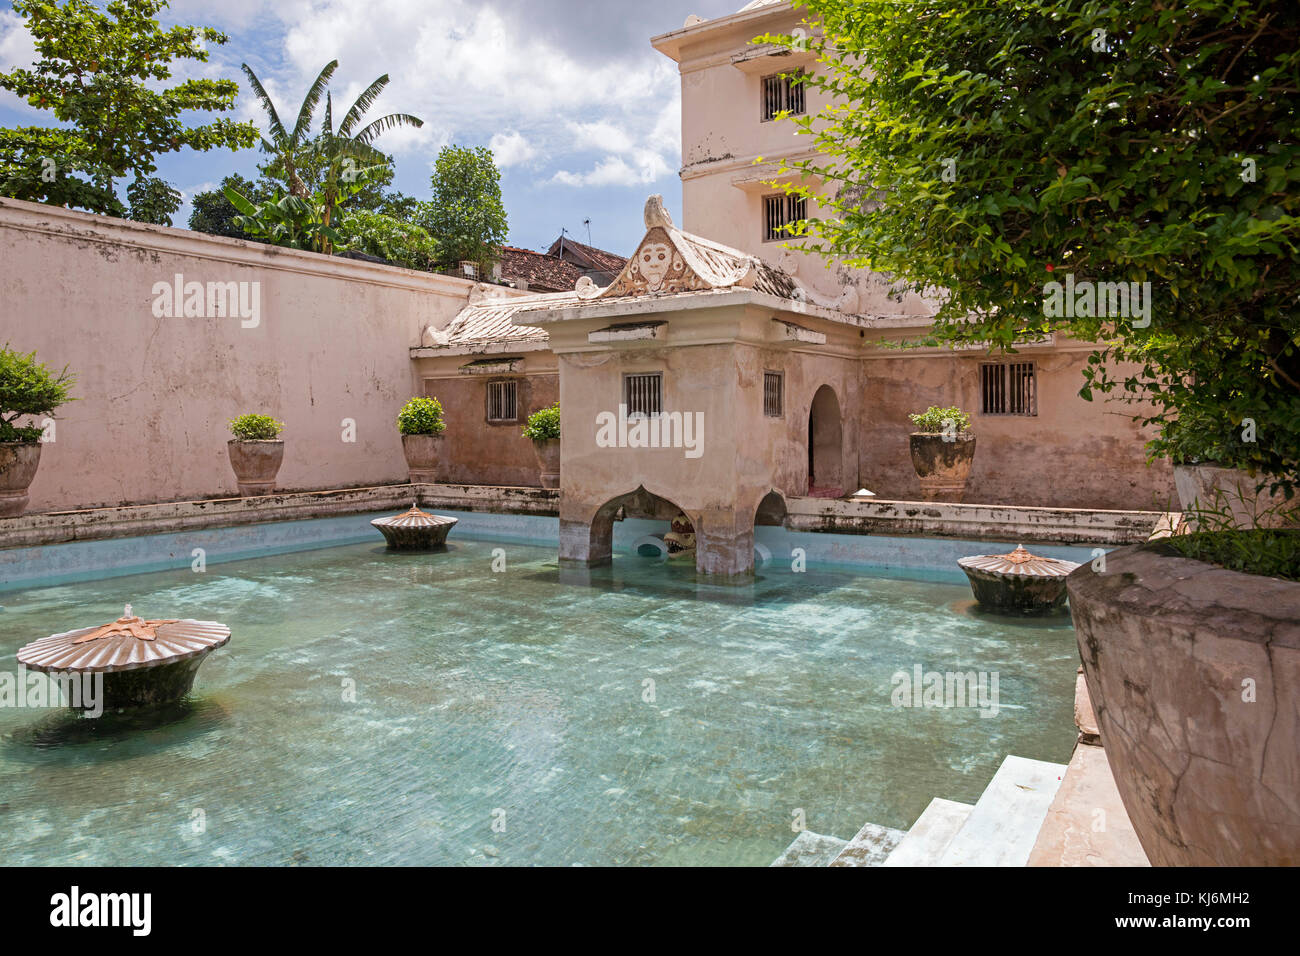 Bathing complex at the Taman Sari Water Castle, site of a former royal garden of the Sultanate of Yogyakarta, Java, Indonesia Stock Photo